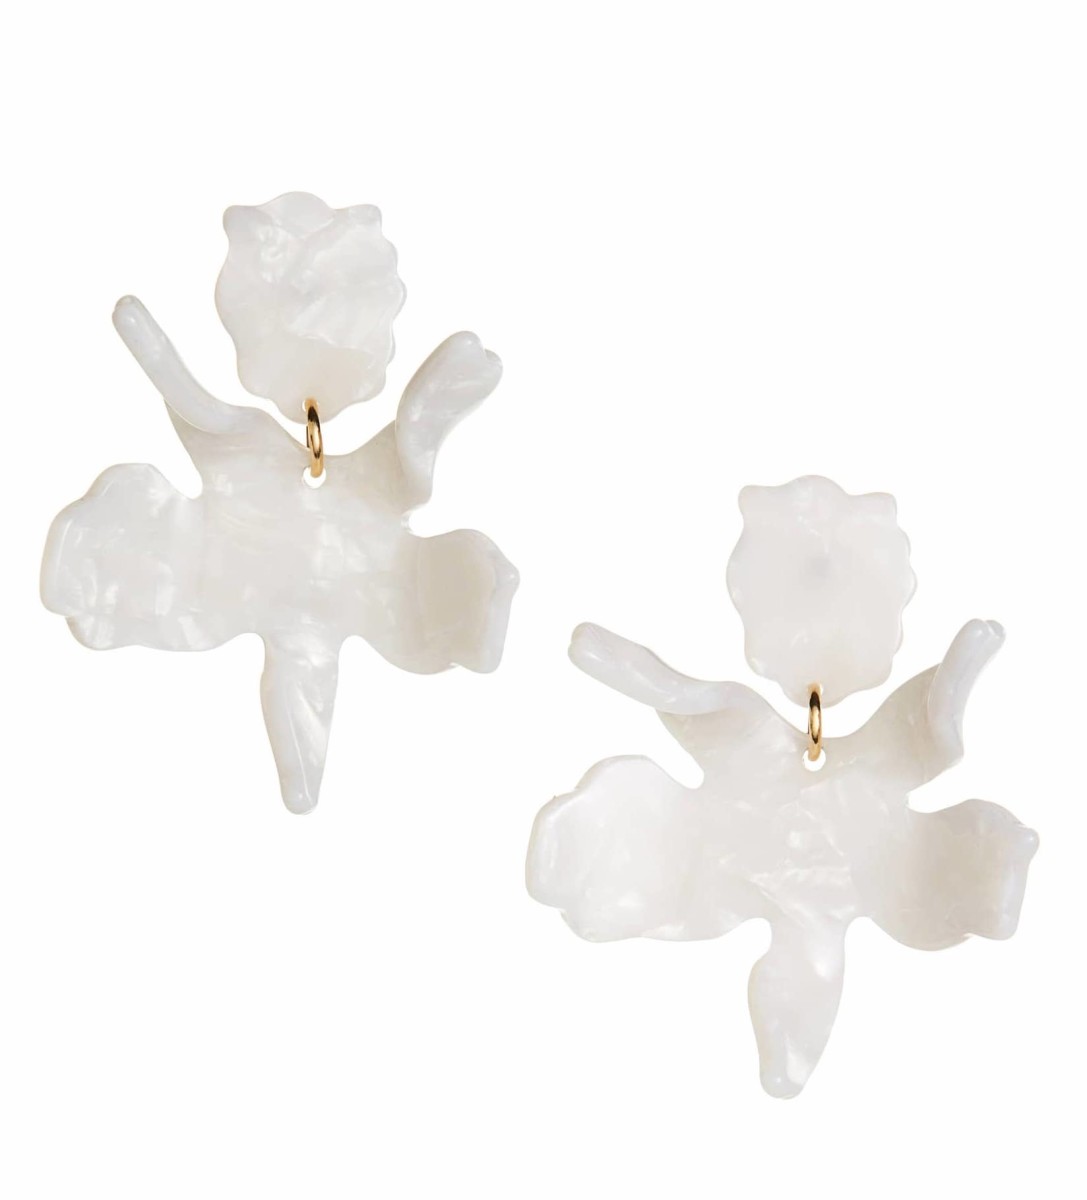 Lele Sadoughi Small Paper Lily Drop Earrings, $125, available here.